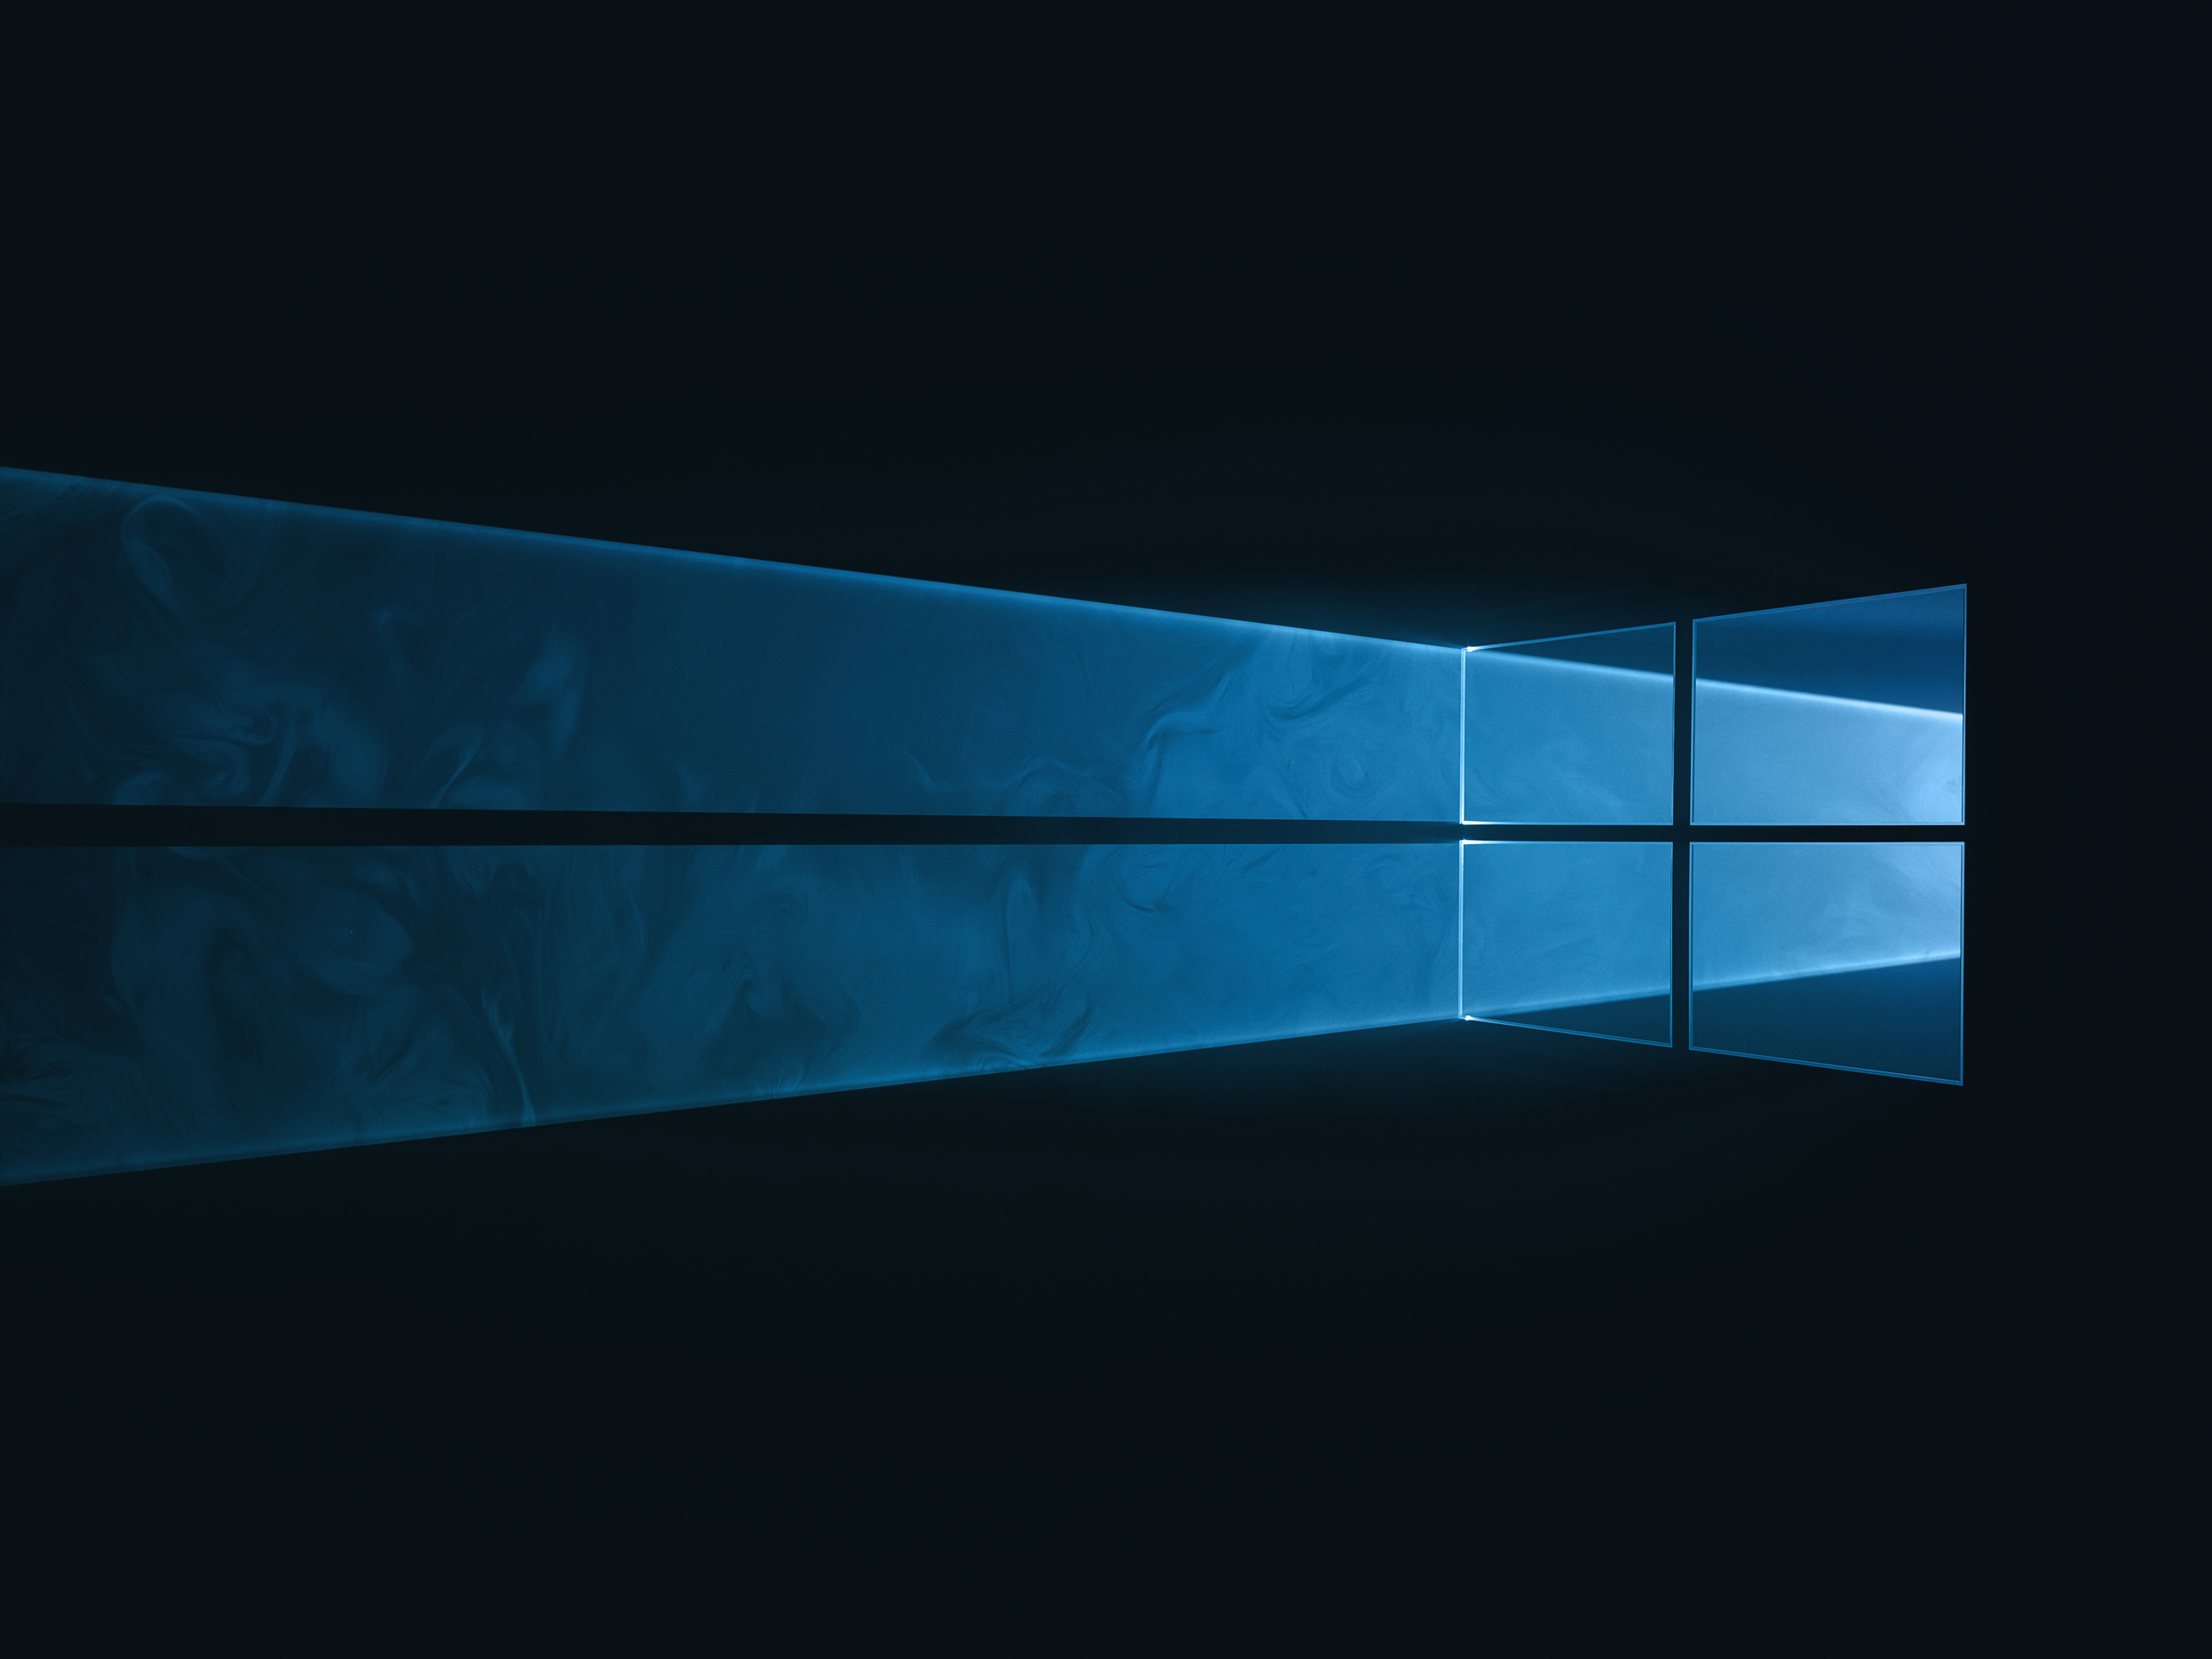 WIP versions of Windows 10 desktop background with light being filtered through a physical windows 10 logo